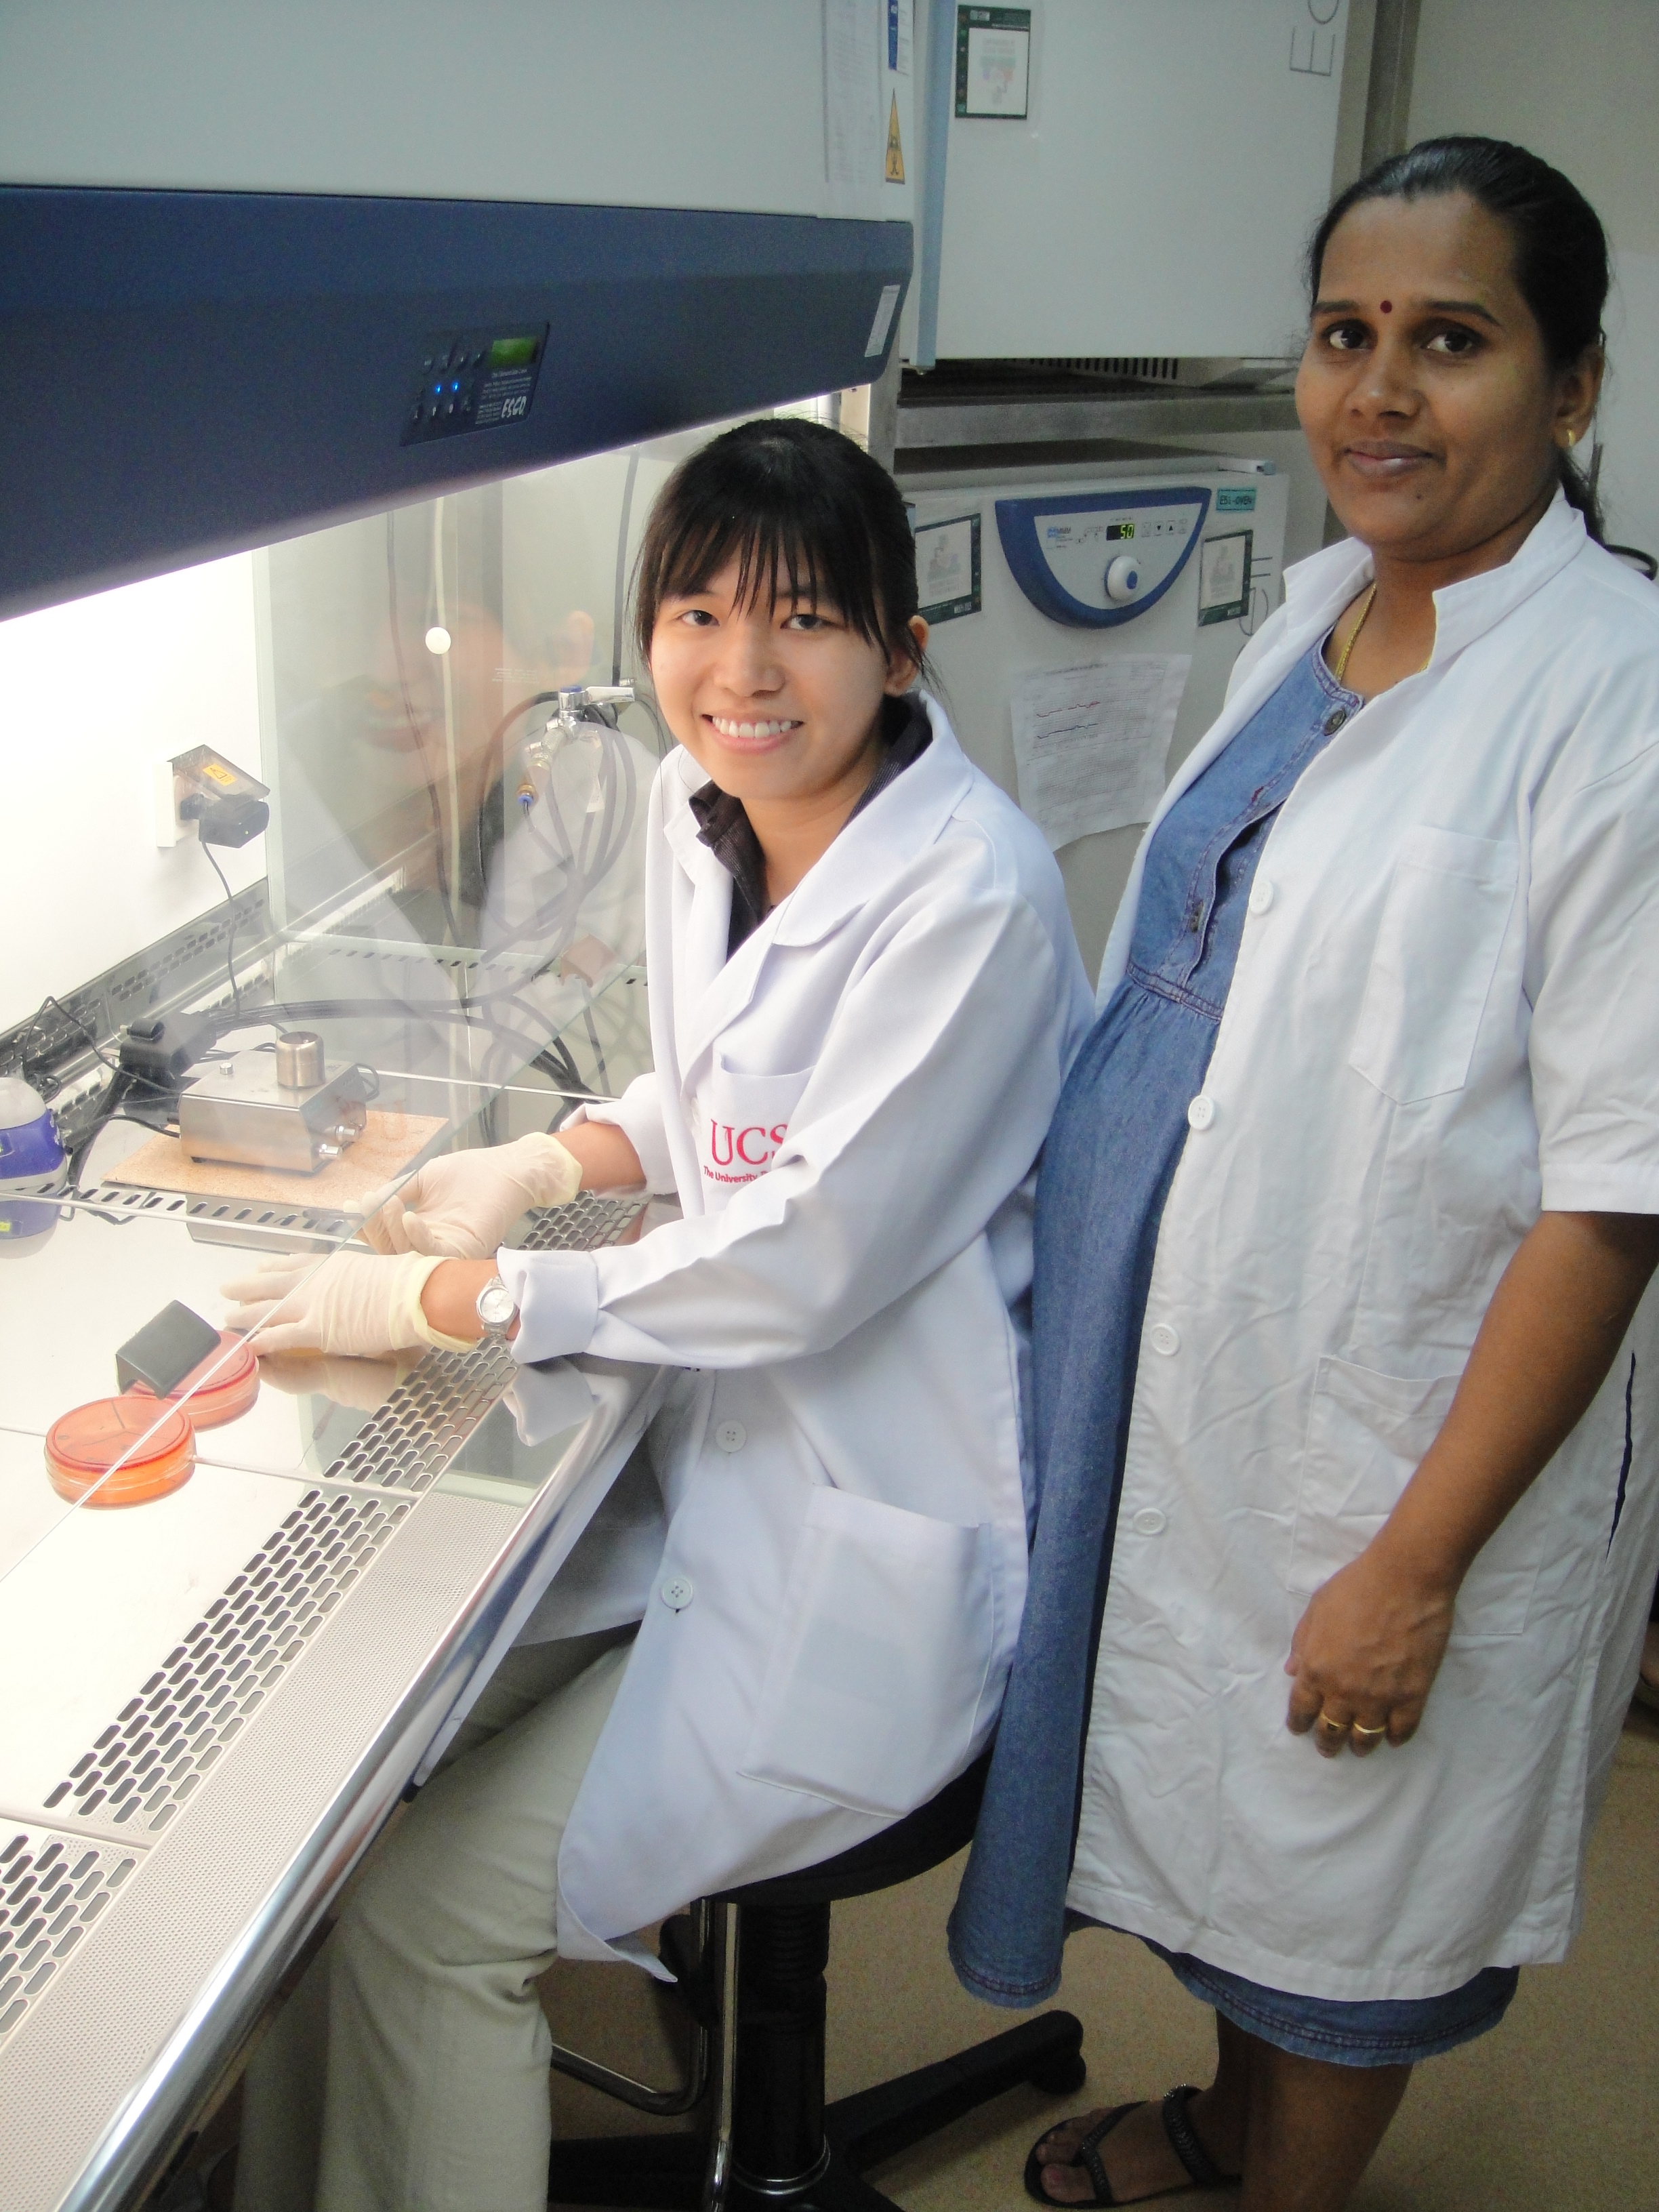 Students at UCSI University have access to state-of-the-art labs